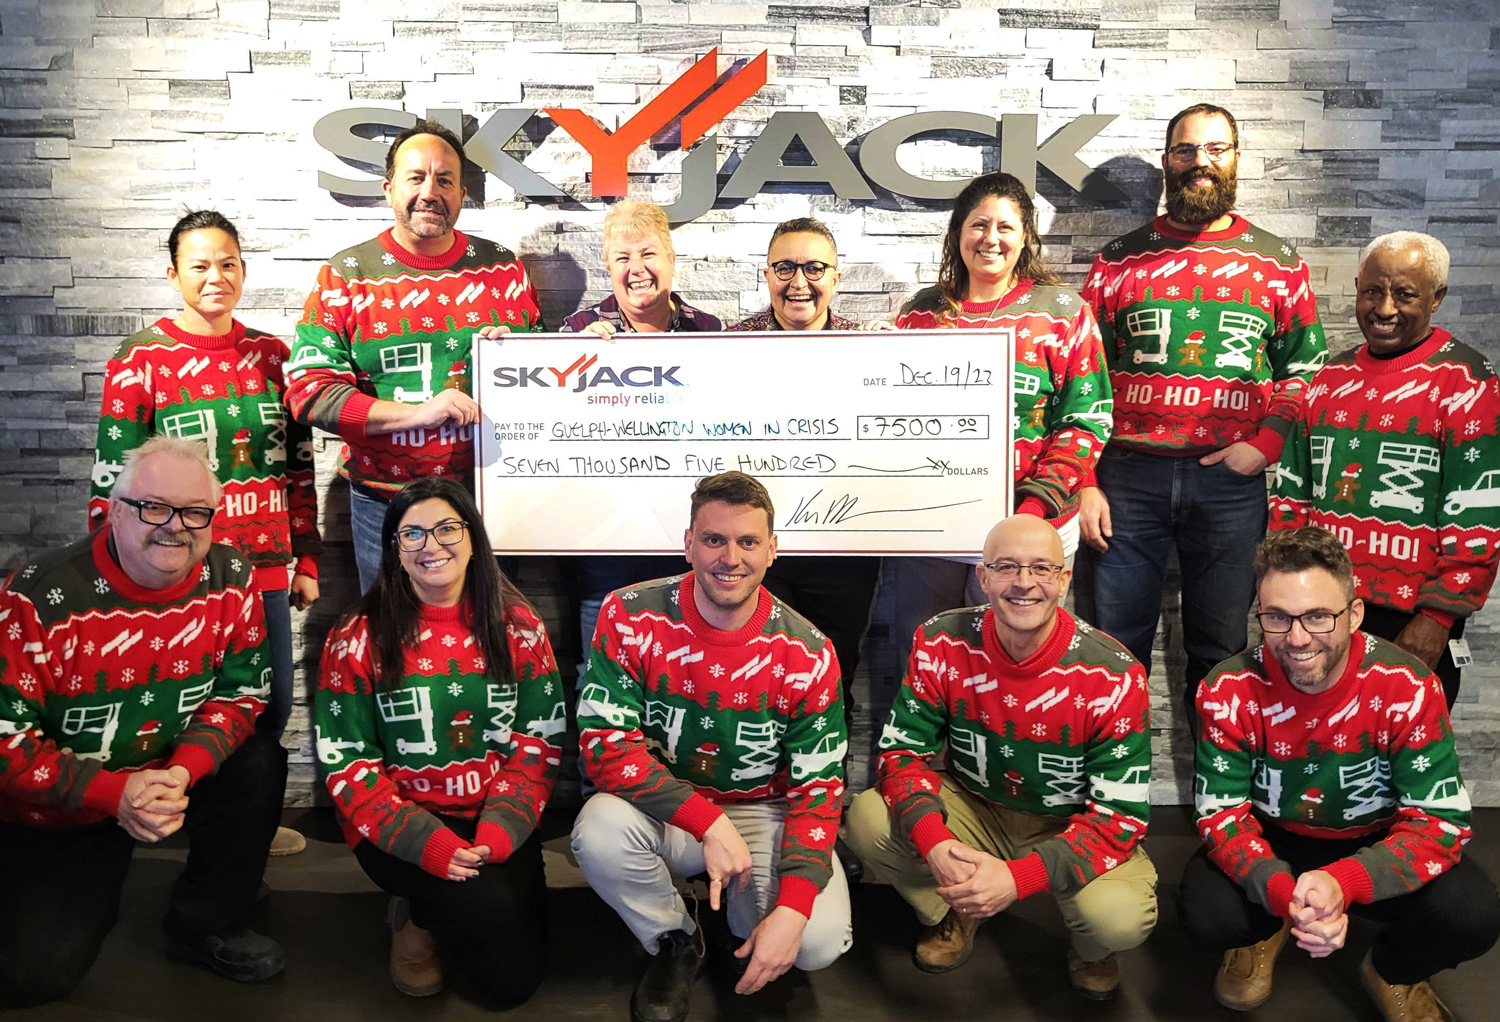 Ugly Sweaters for Skyjack team